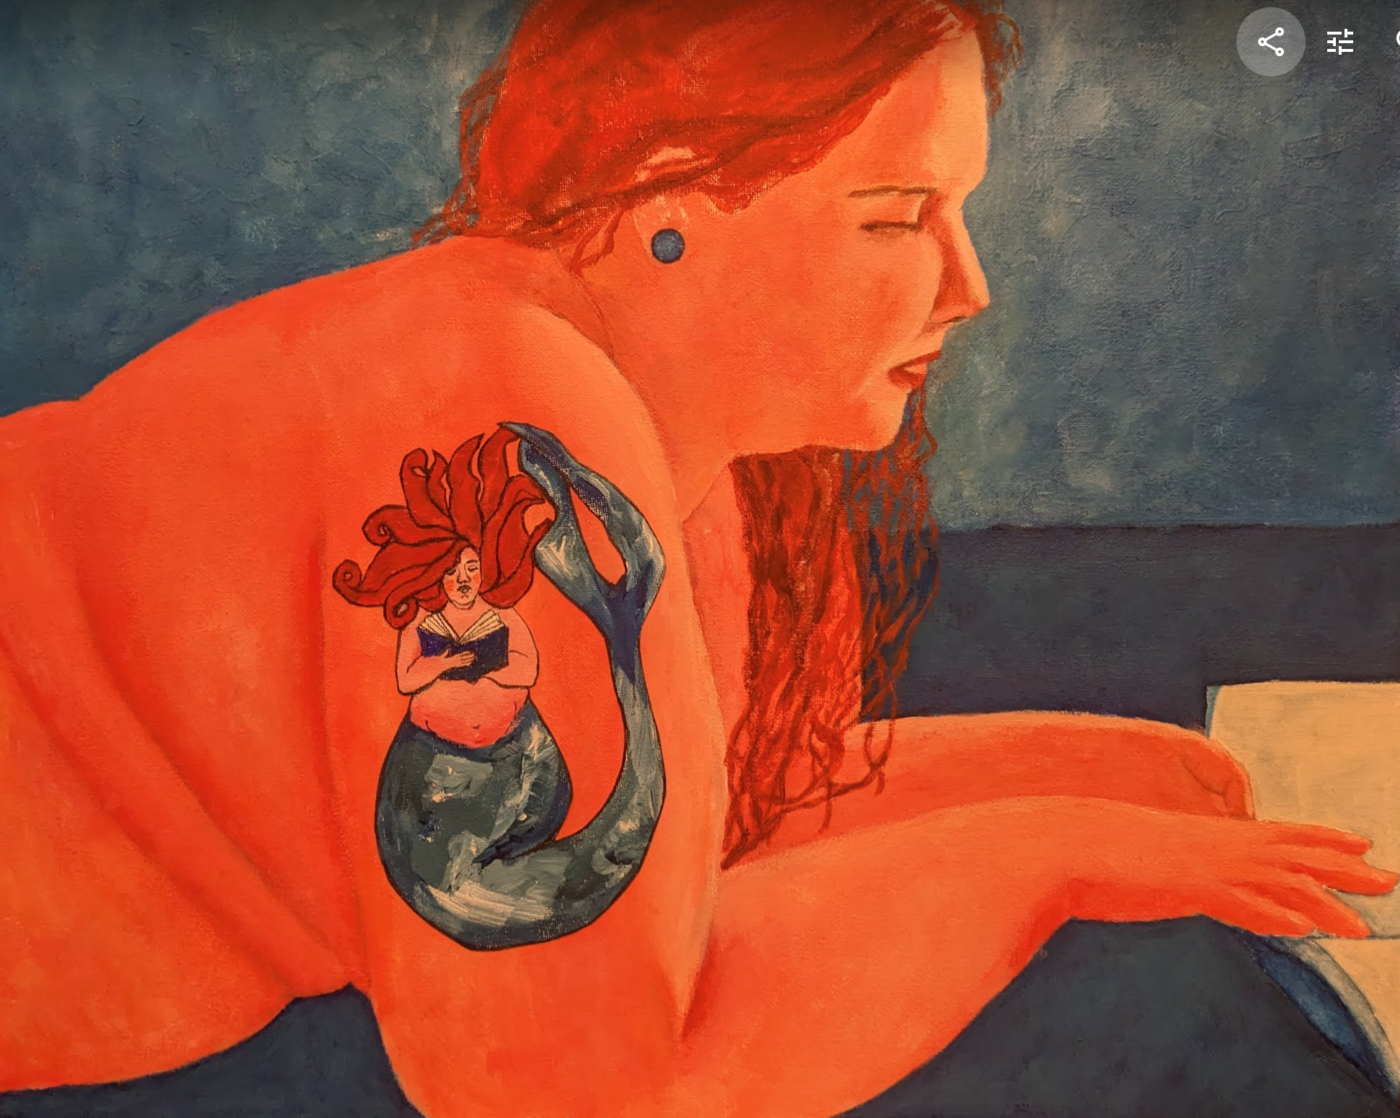 A painting of a young feminine person with bright orange skin and a tattoo of a mermaid reading. The person is lying down and reading as well.